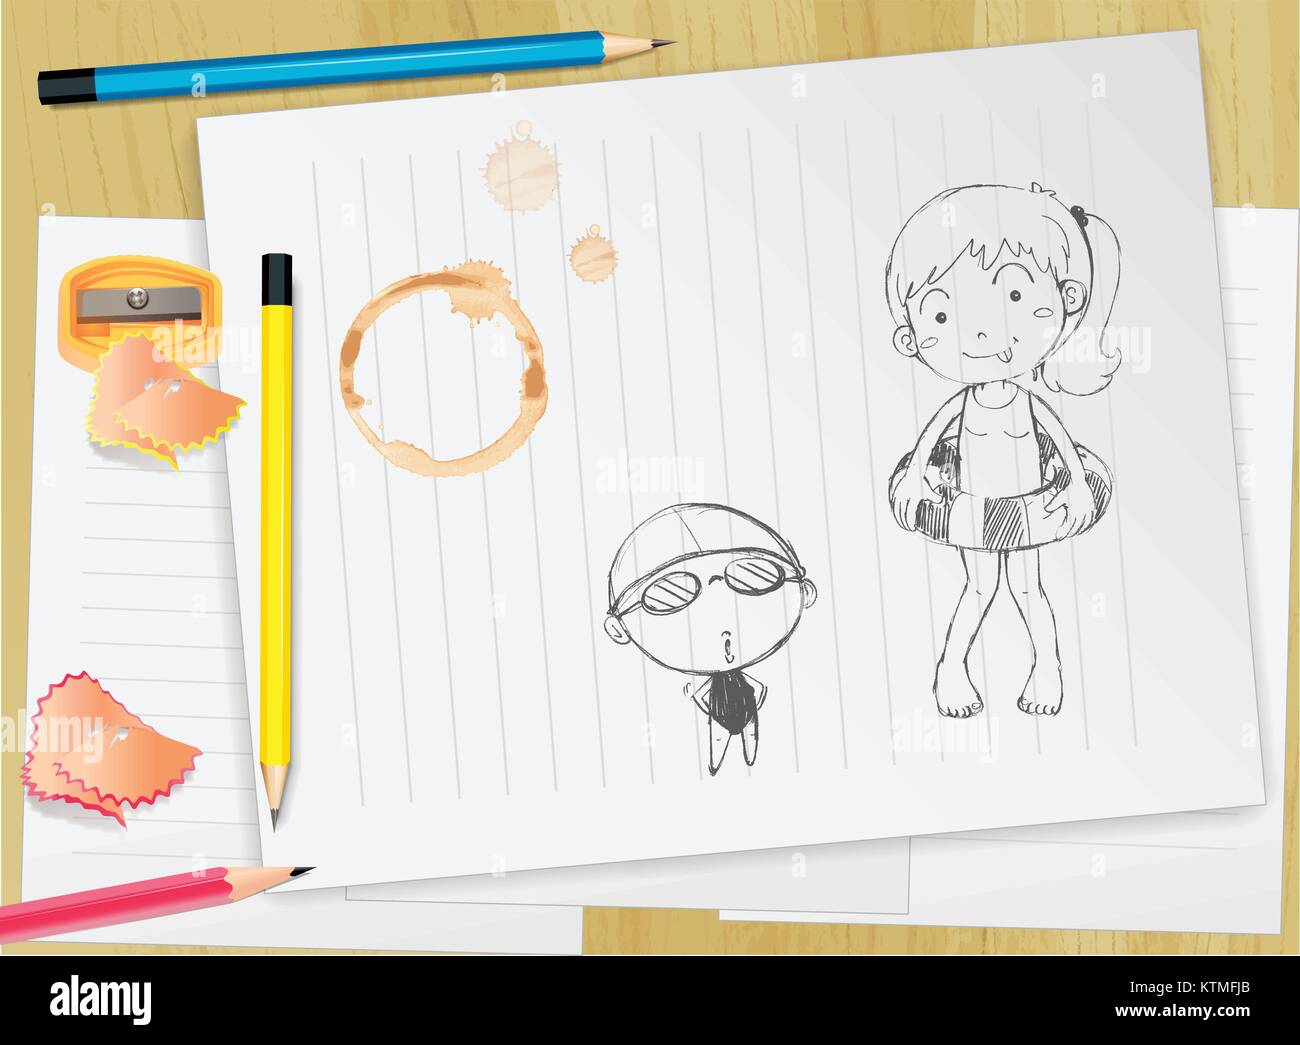 Illustration of a child sketched on paper Stock Vector